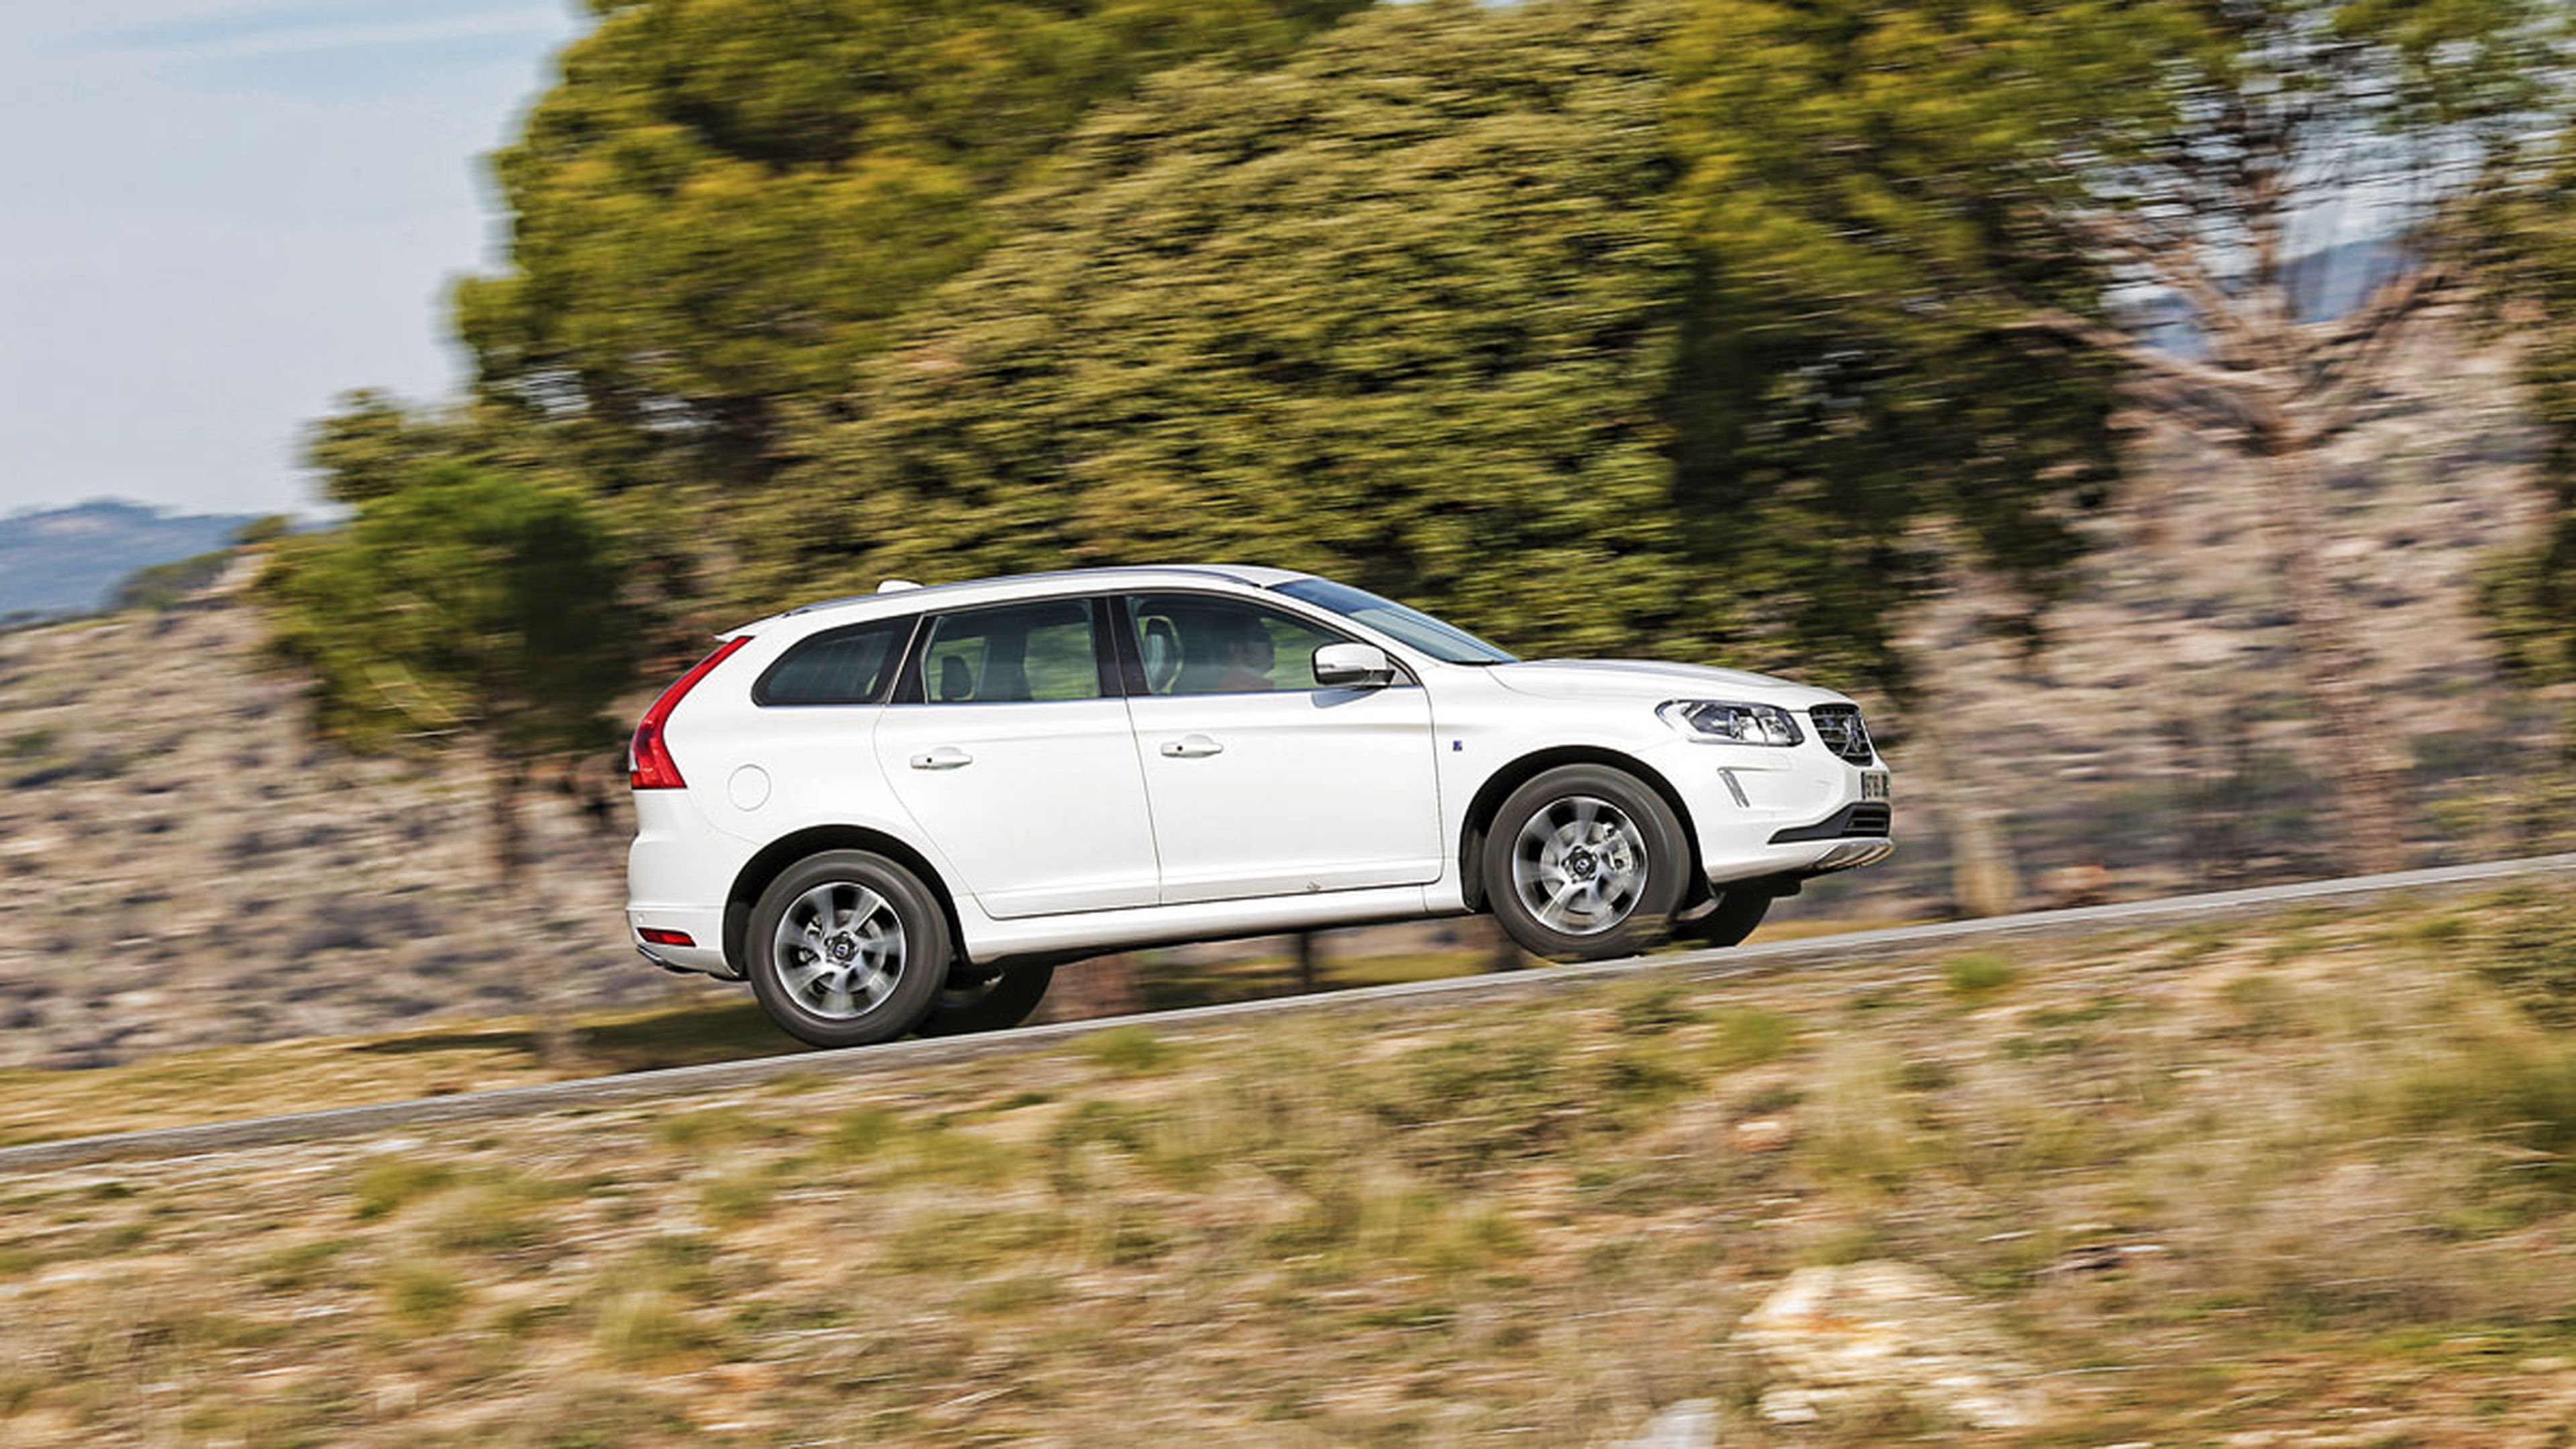 Volvo XC60 Ocean Race lateral